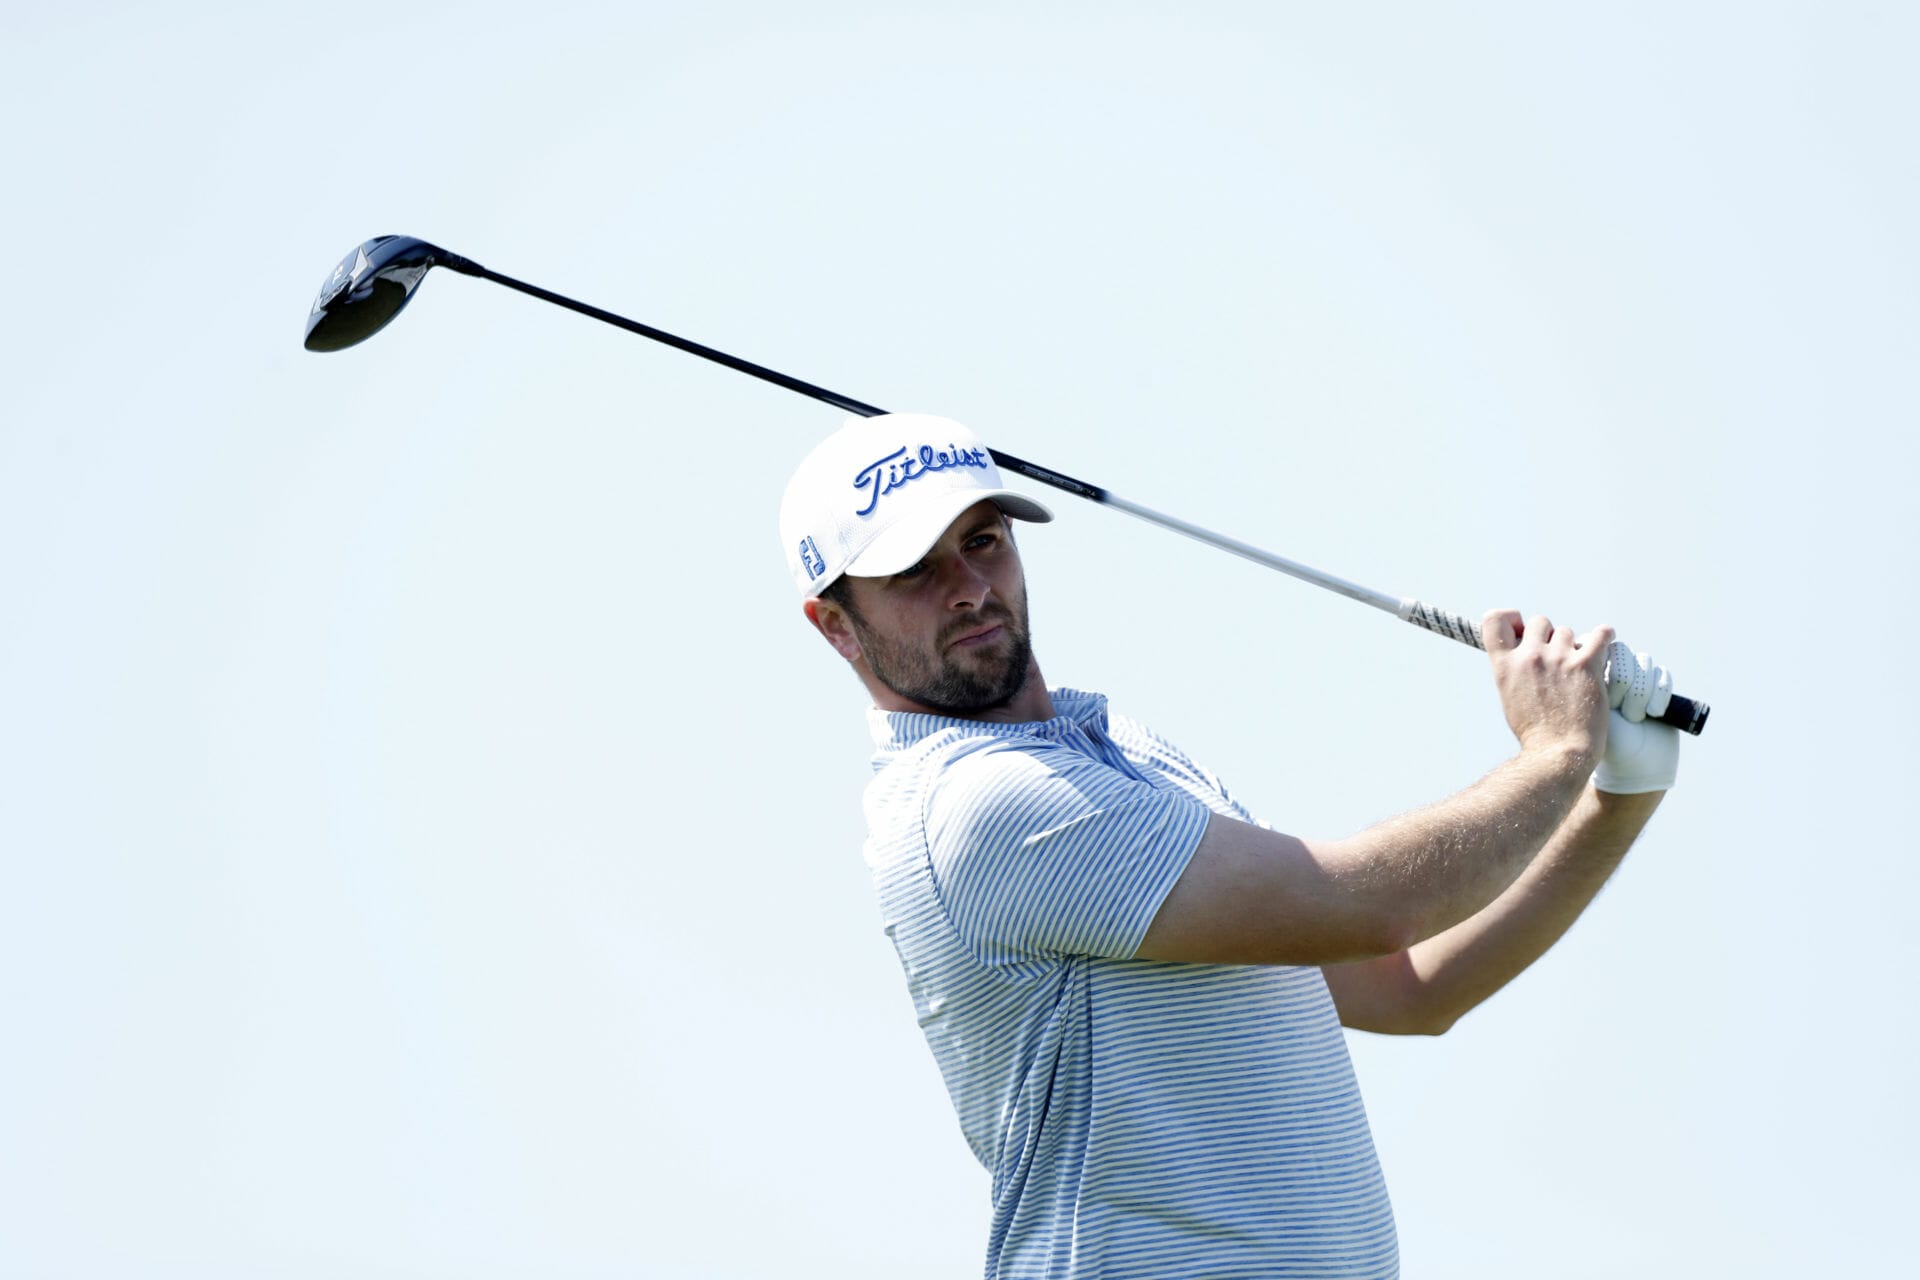 McGee carries form into Andalucia Match Play